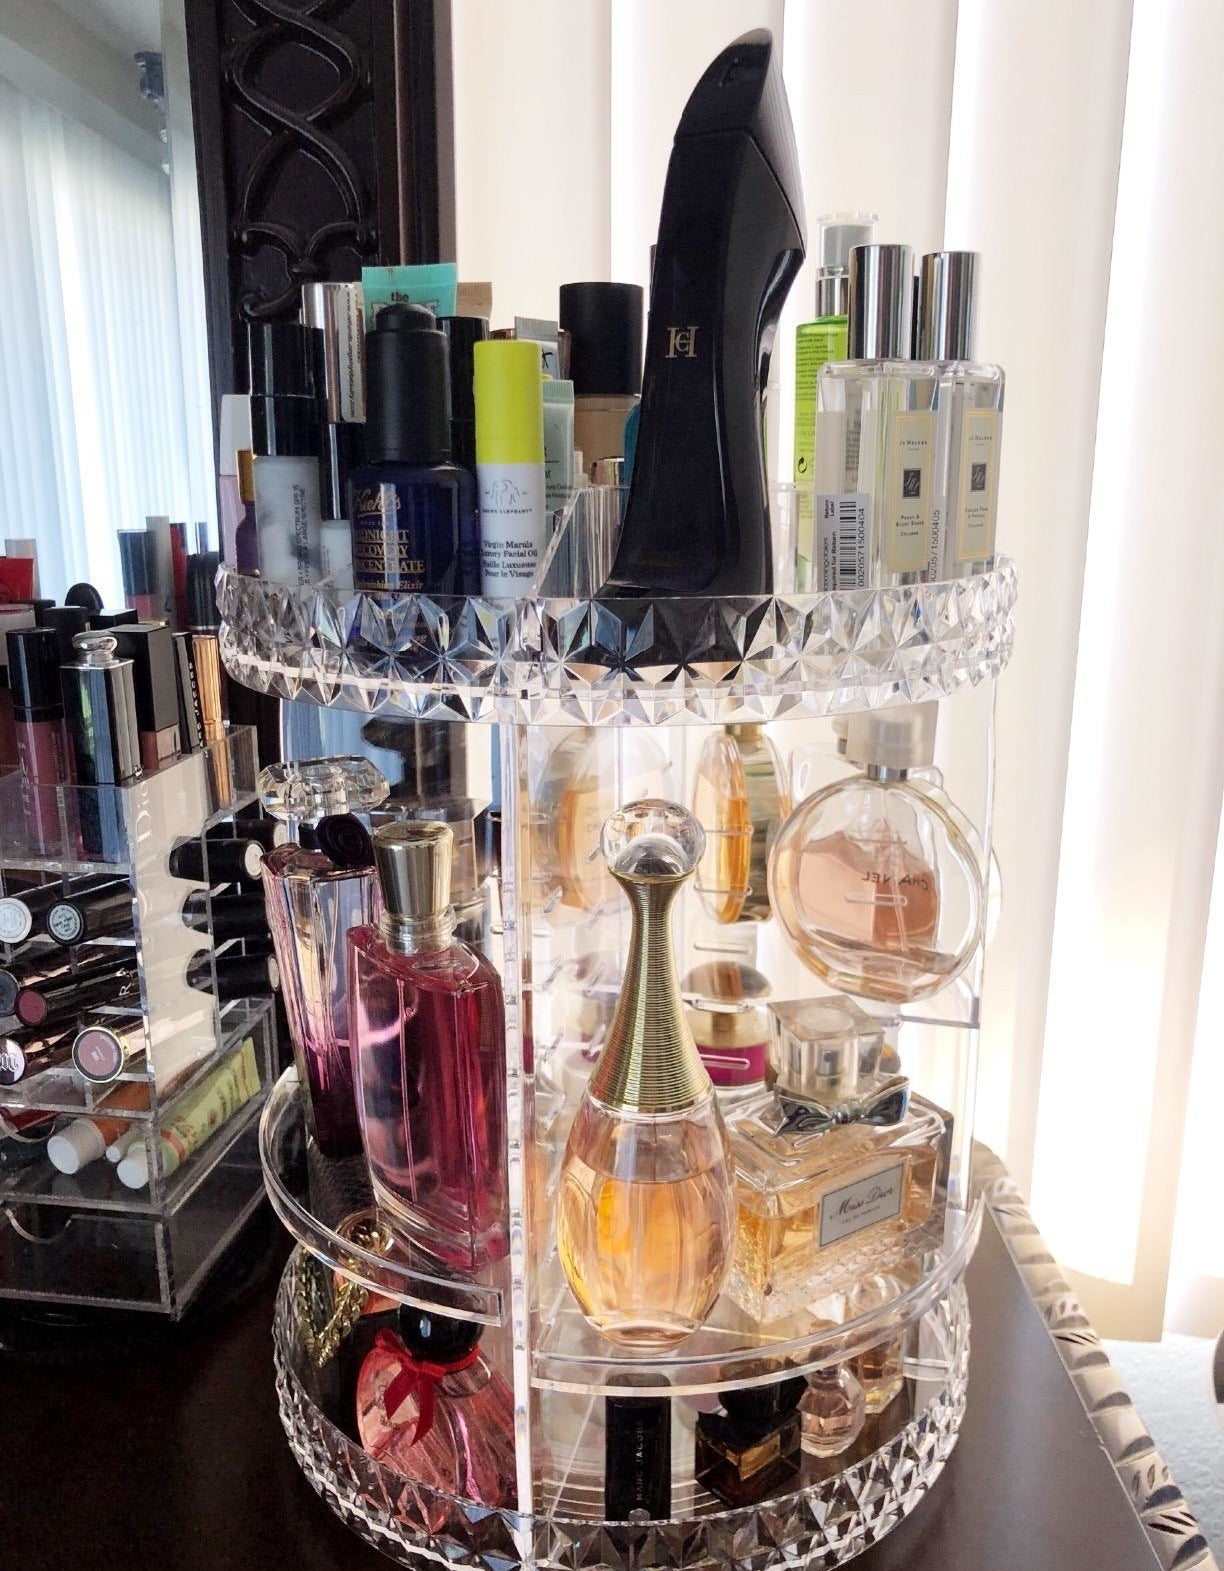 the three-tier makeup holder filled with perfume and makeup